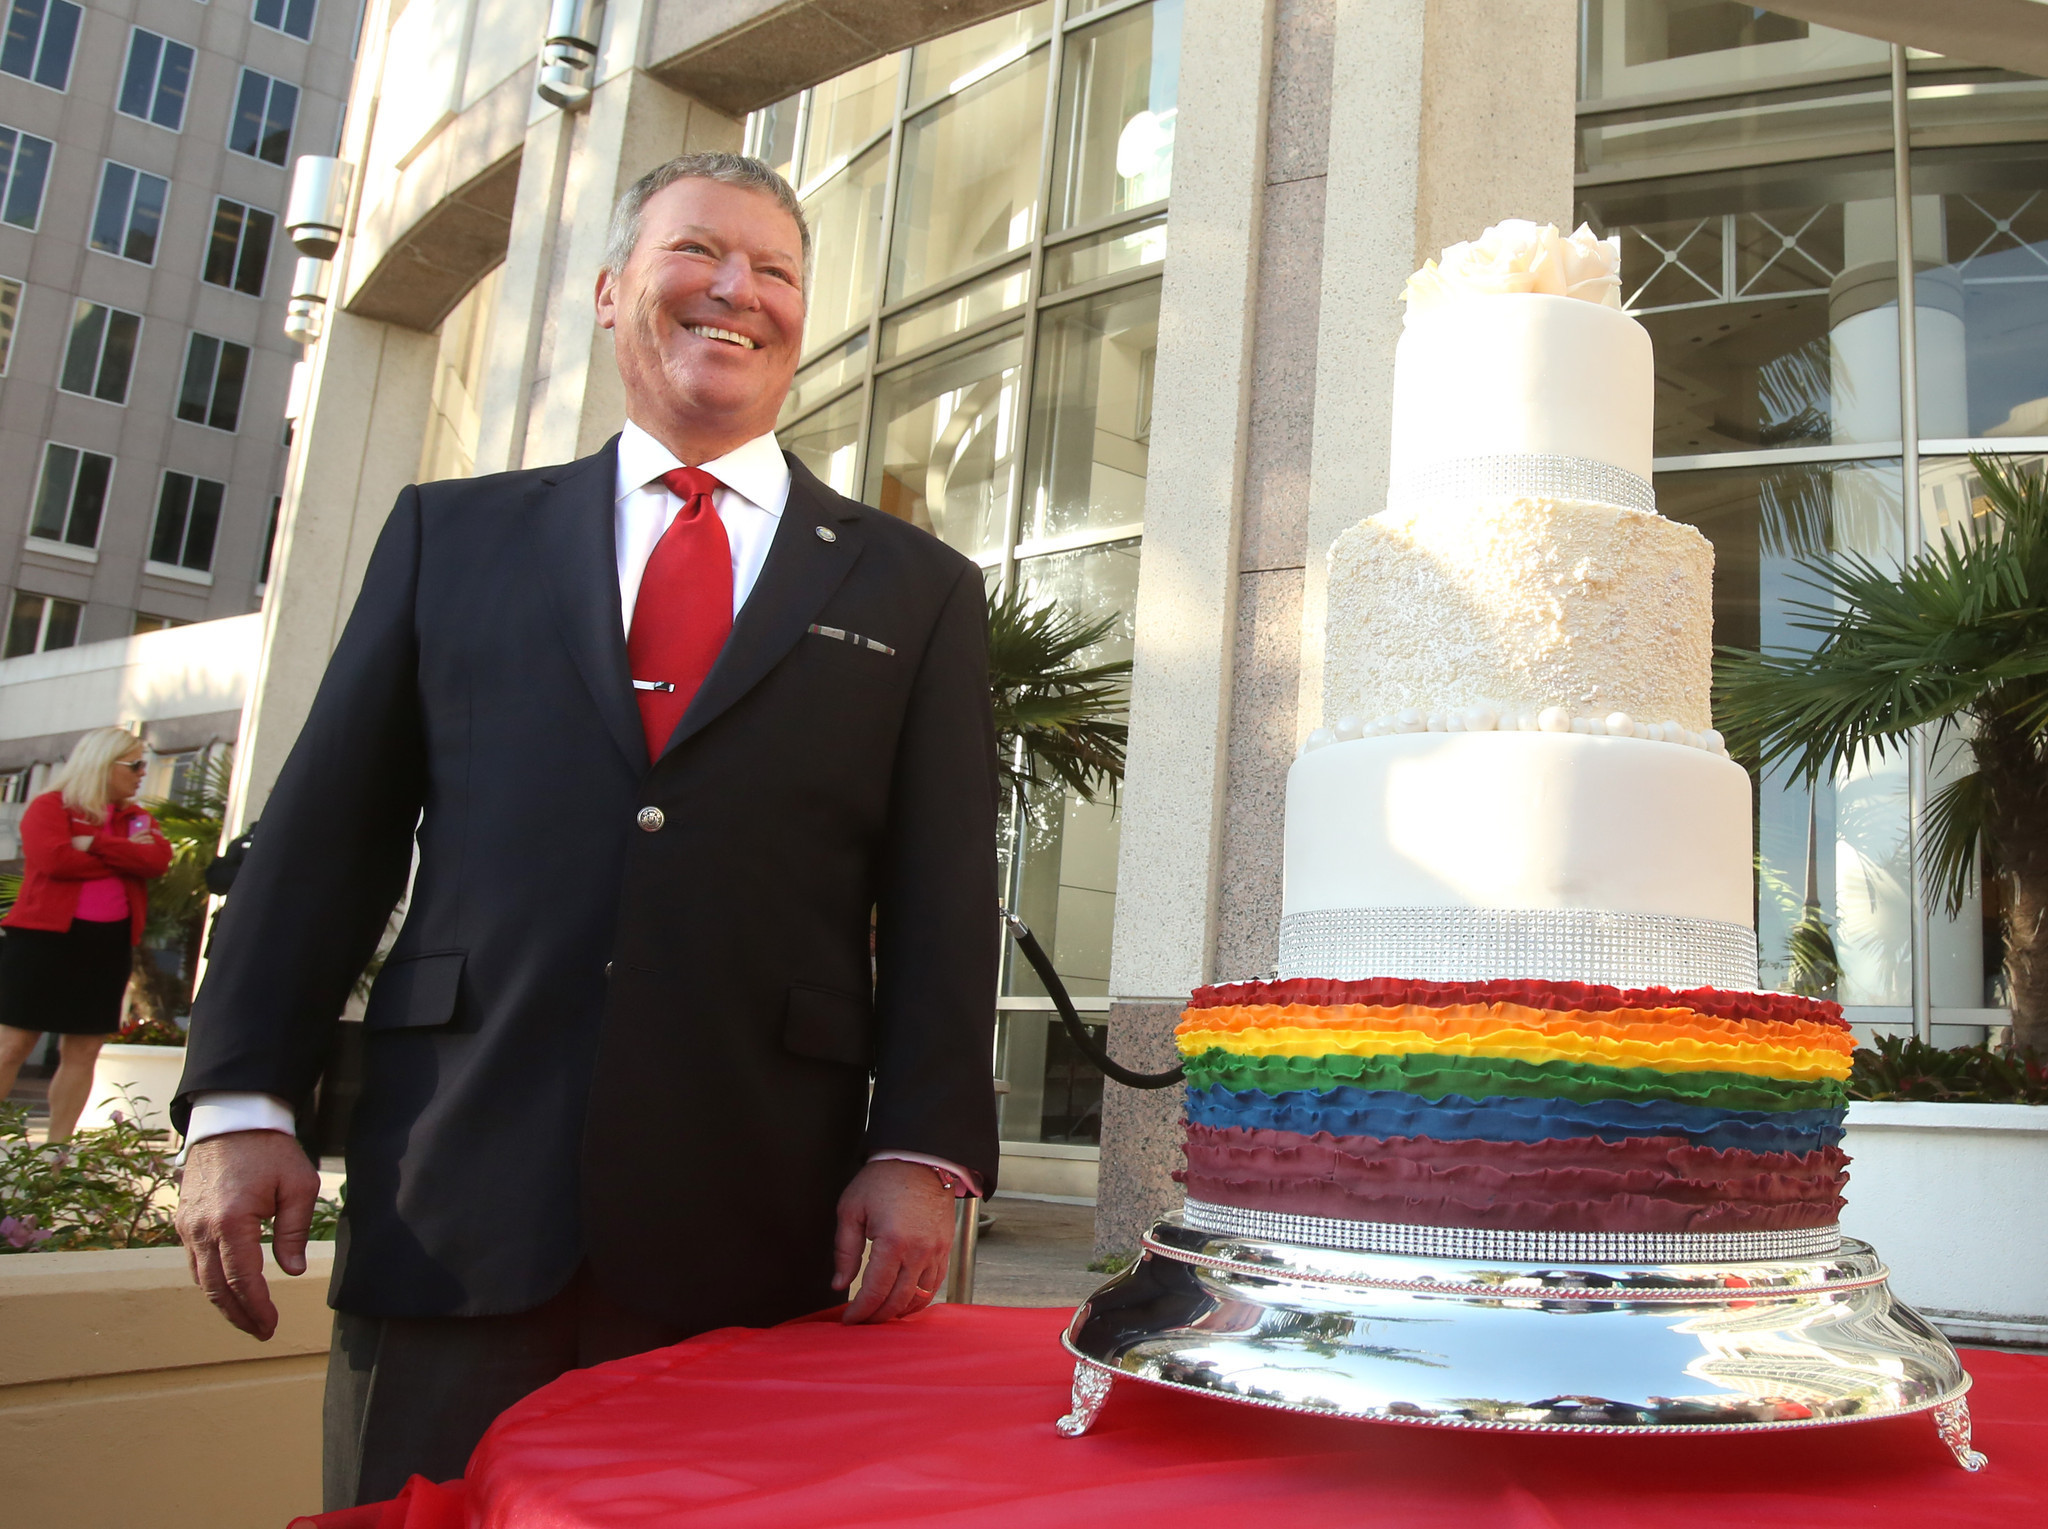 Same-sex weddings could mean big business for Central Florida wedding industry ...2048 x 1529